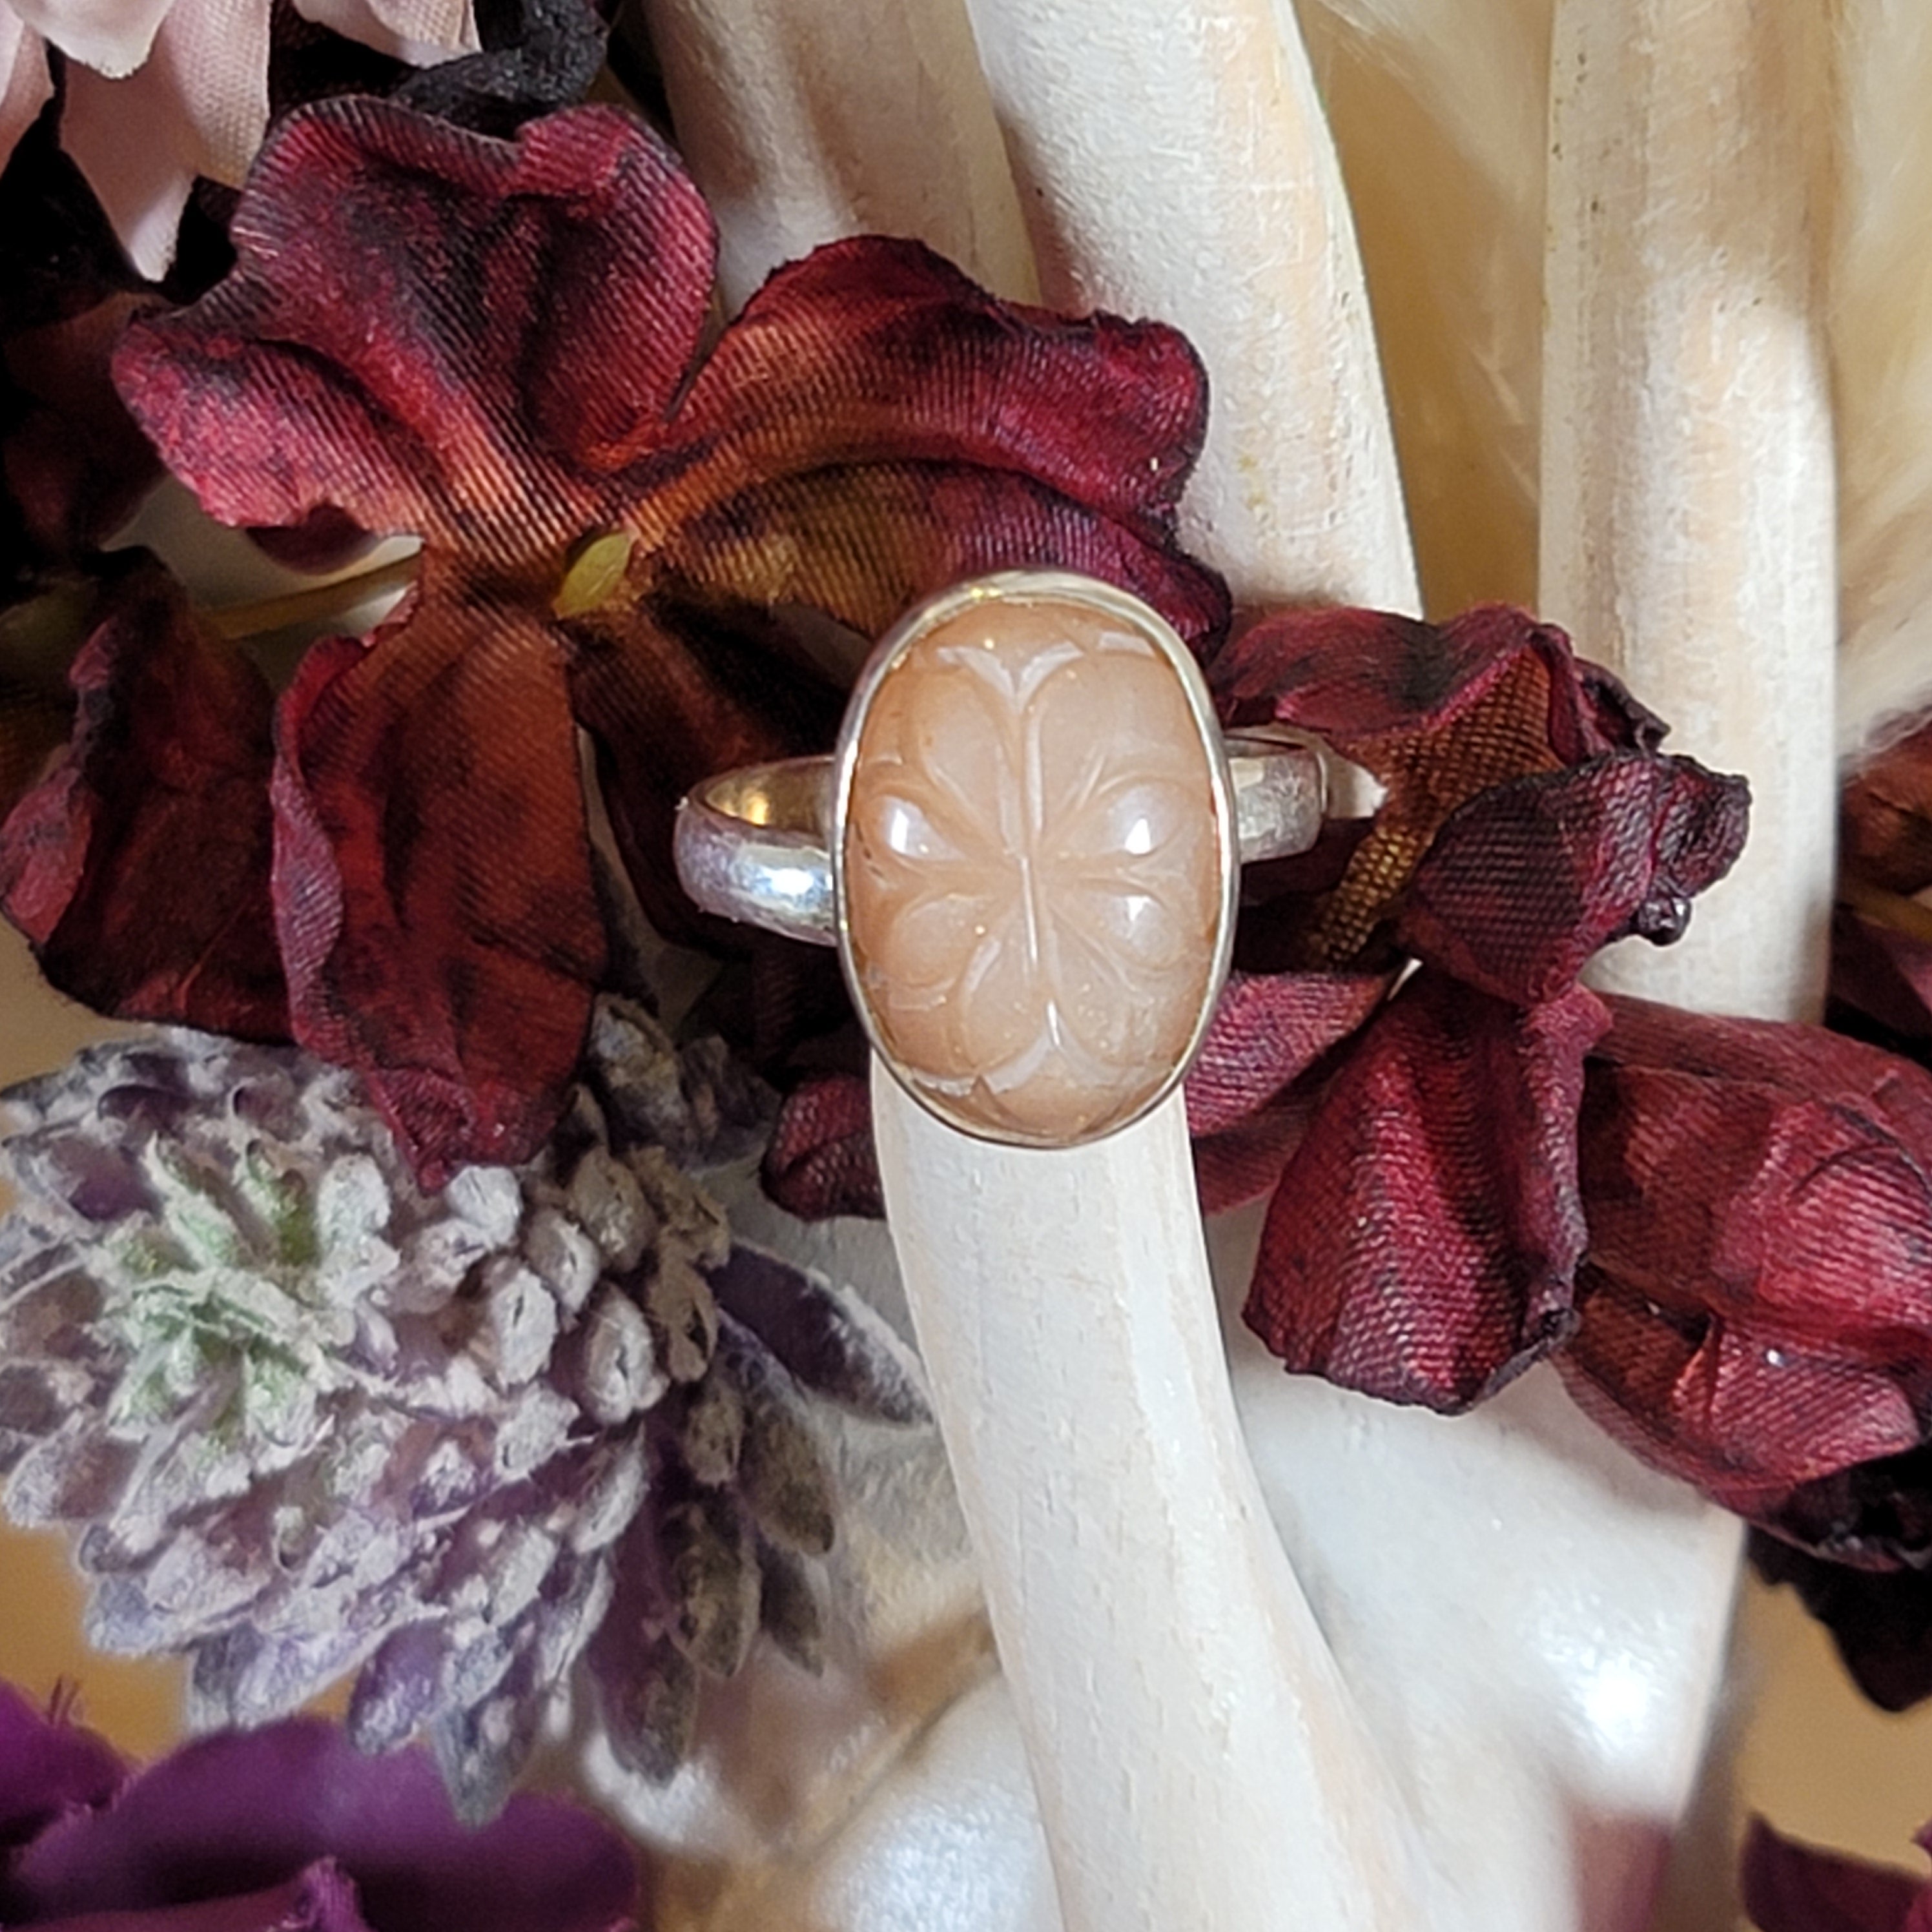 Peach Moonstone Adjustable Ring .925 Silver for New Beginnings, Artistic Expression, Creativity & Manifestation